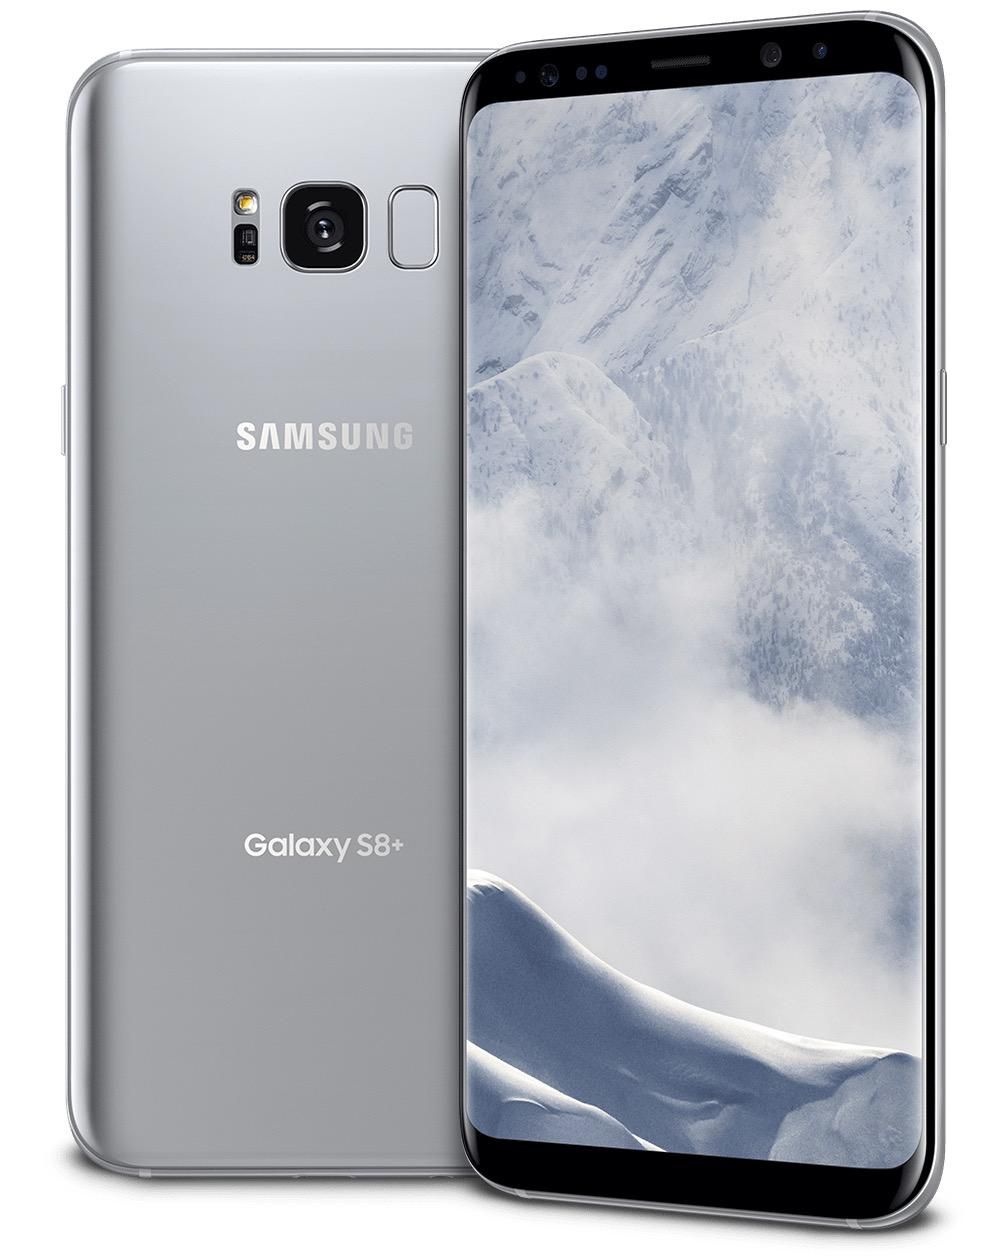 https blogs images.forbes.com amitchowdhry files 2017 04 Galaxy S8 Plus